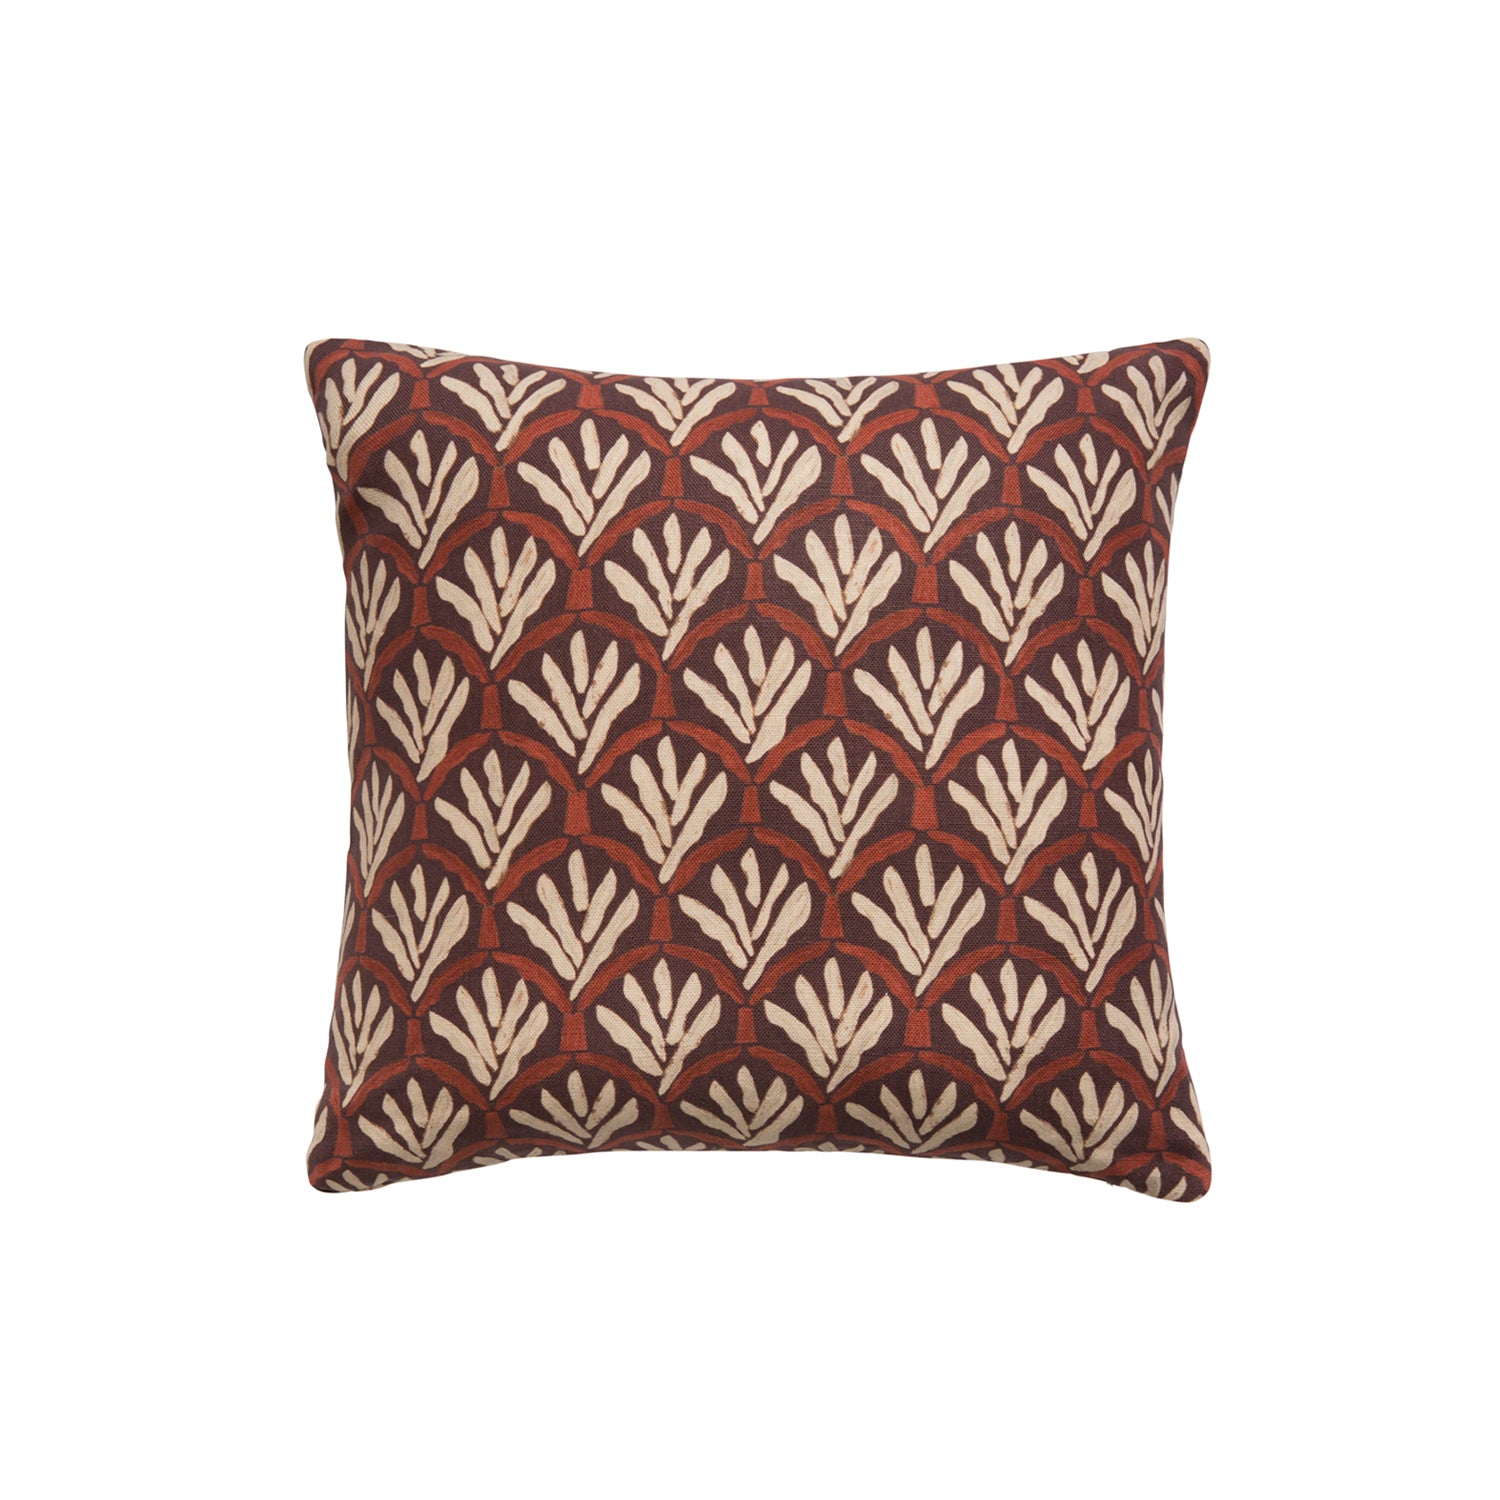 A square throw pillow with a repeating Moroccan-inspired scallop pattern in white and red on a maroon background.